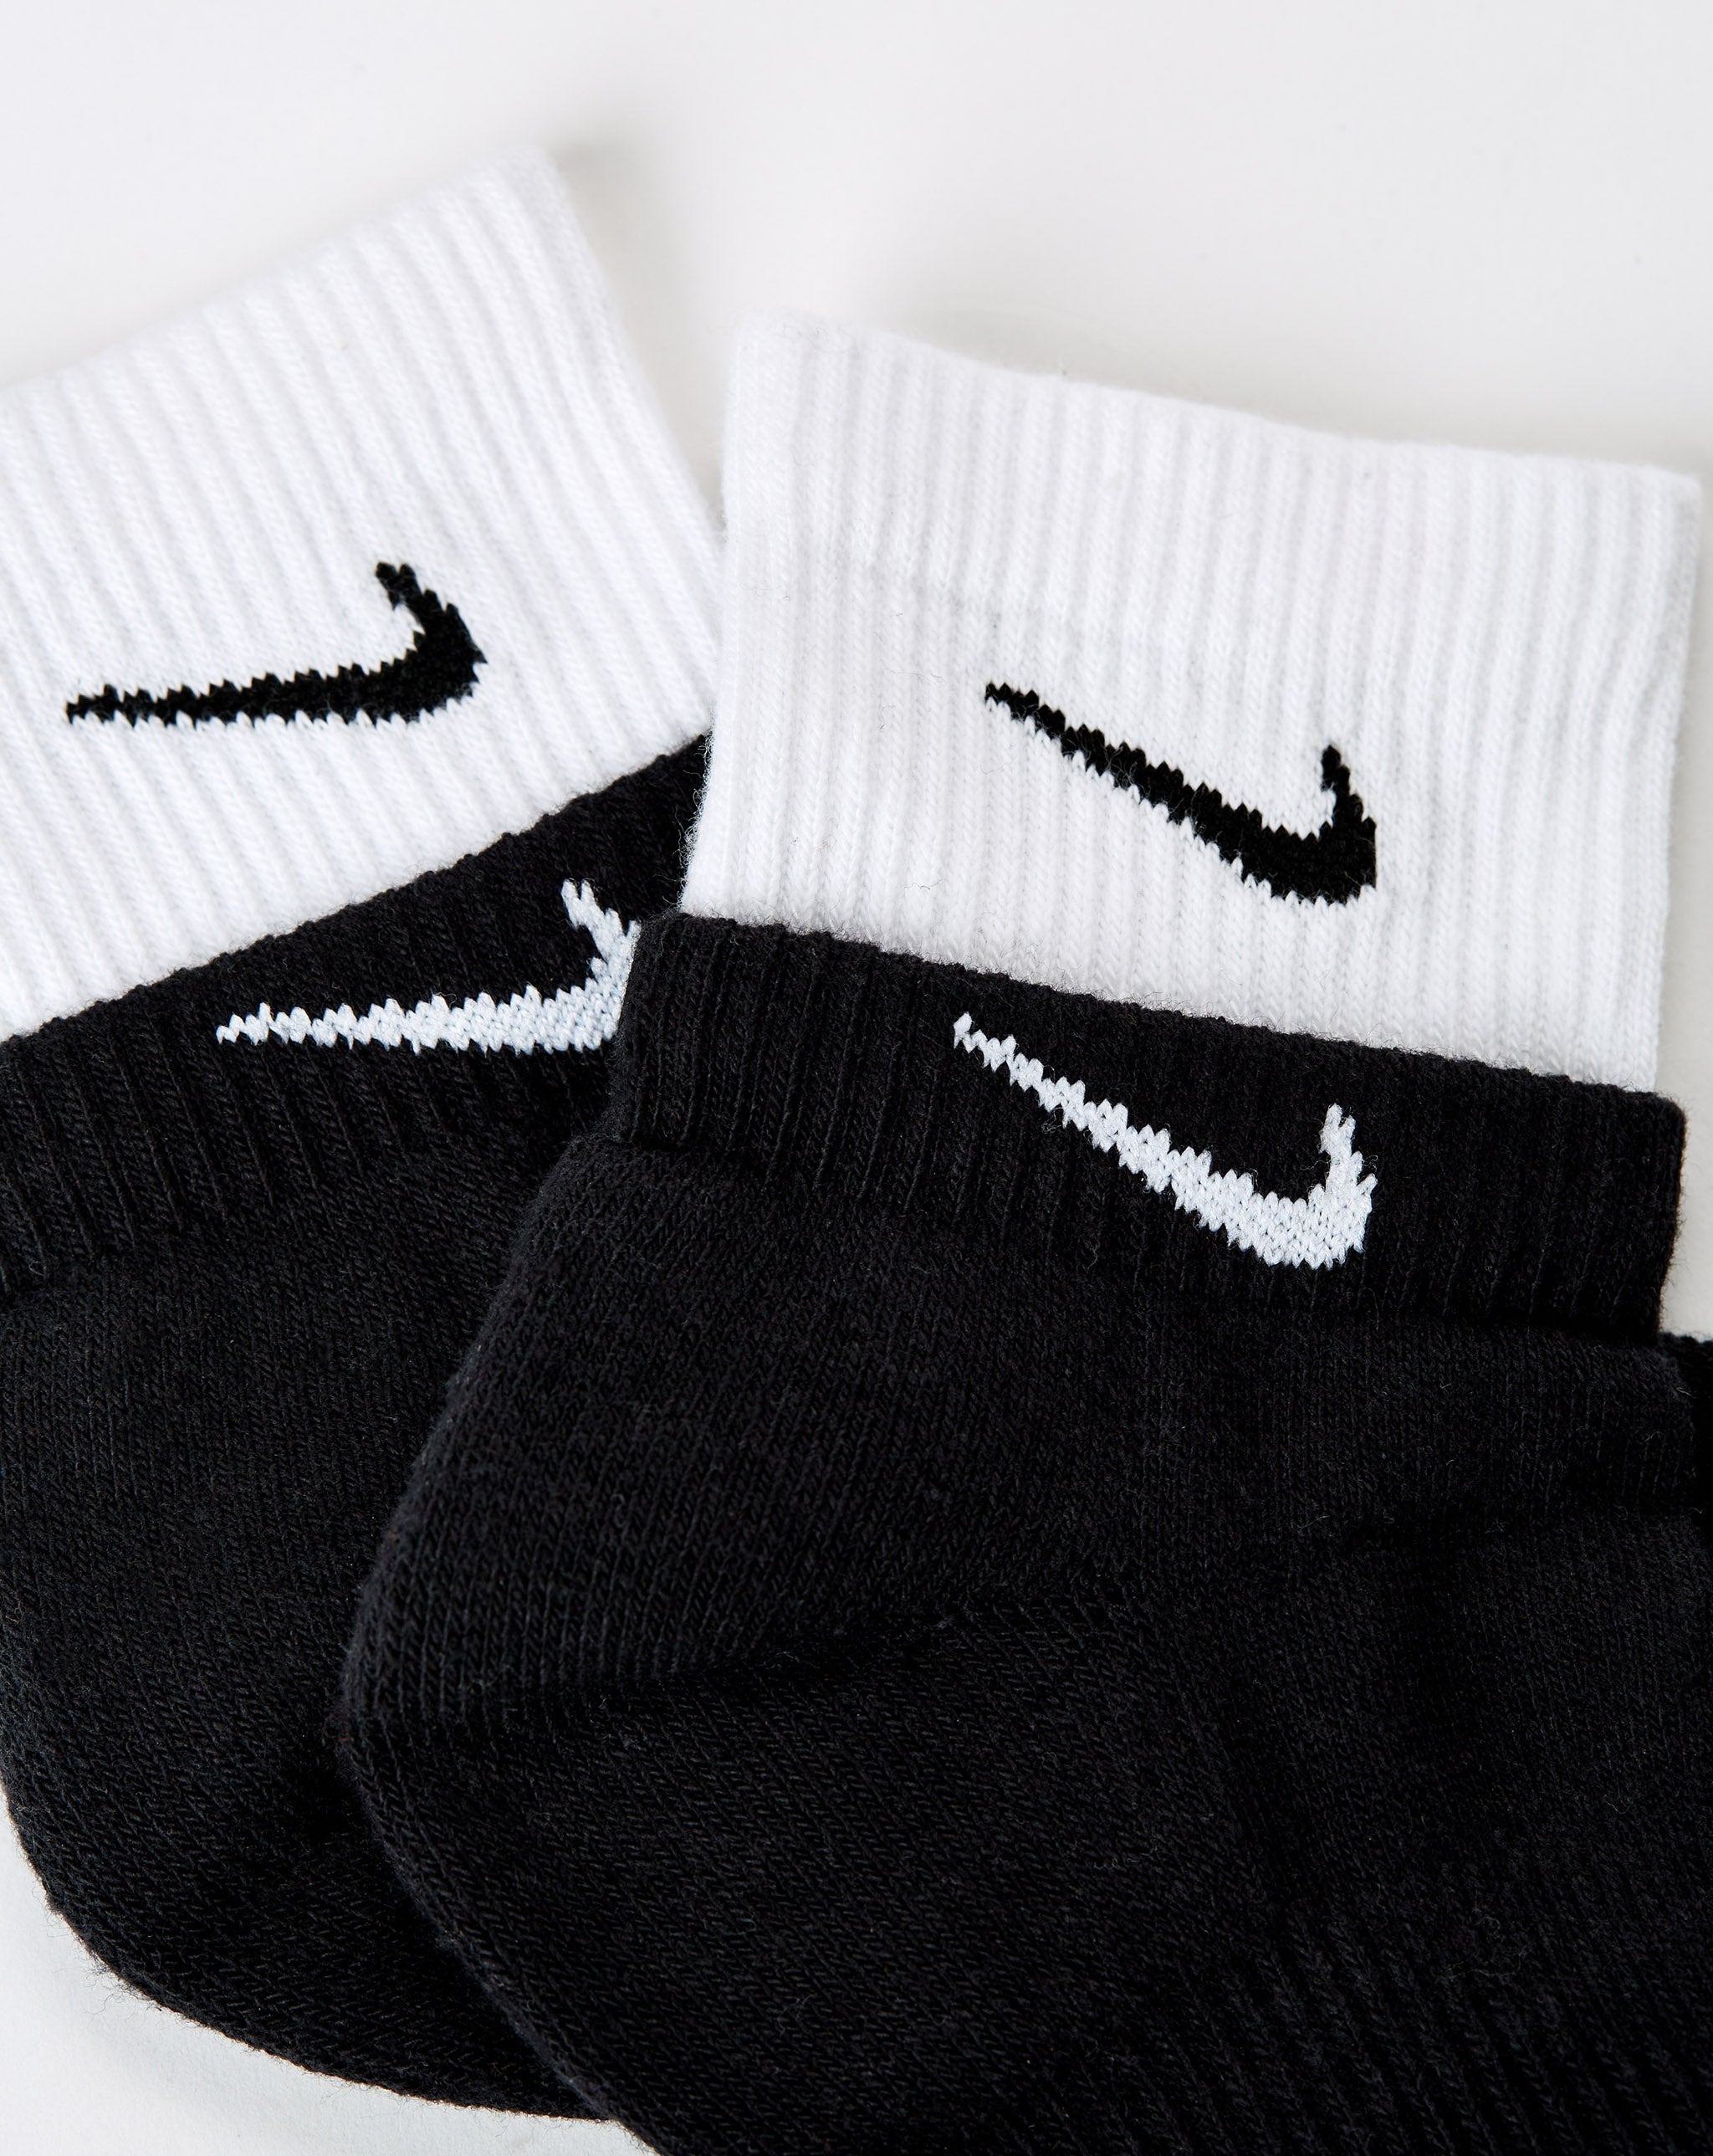 Nike Everyday+ Cushioned Training Ankle Socks - Rule of Next Accessories